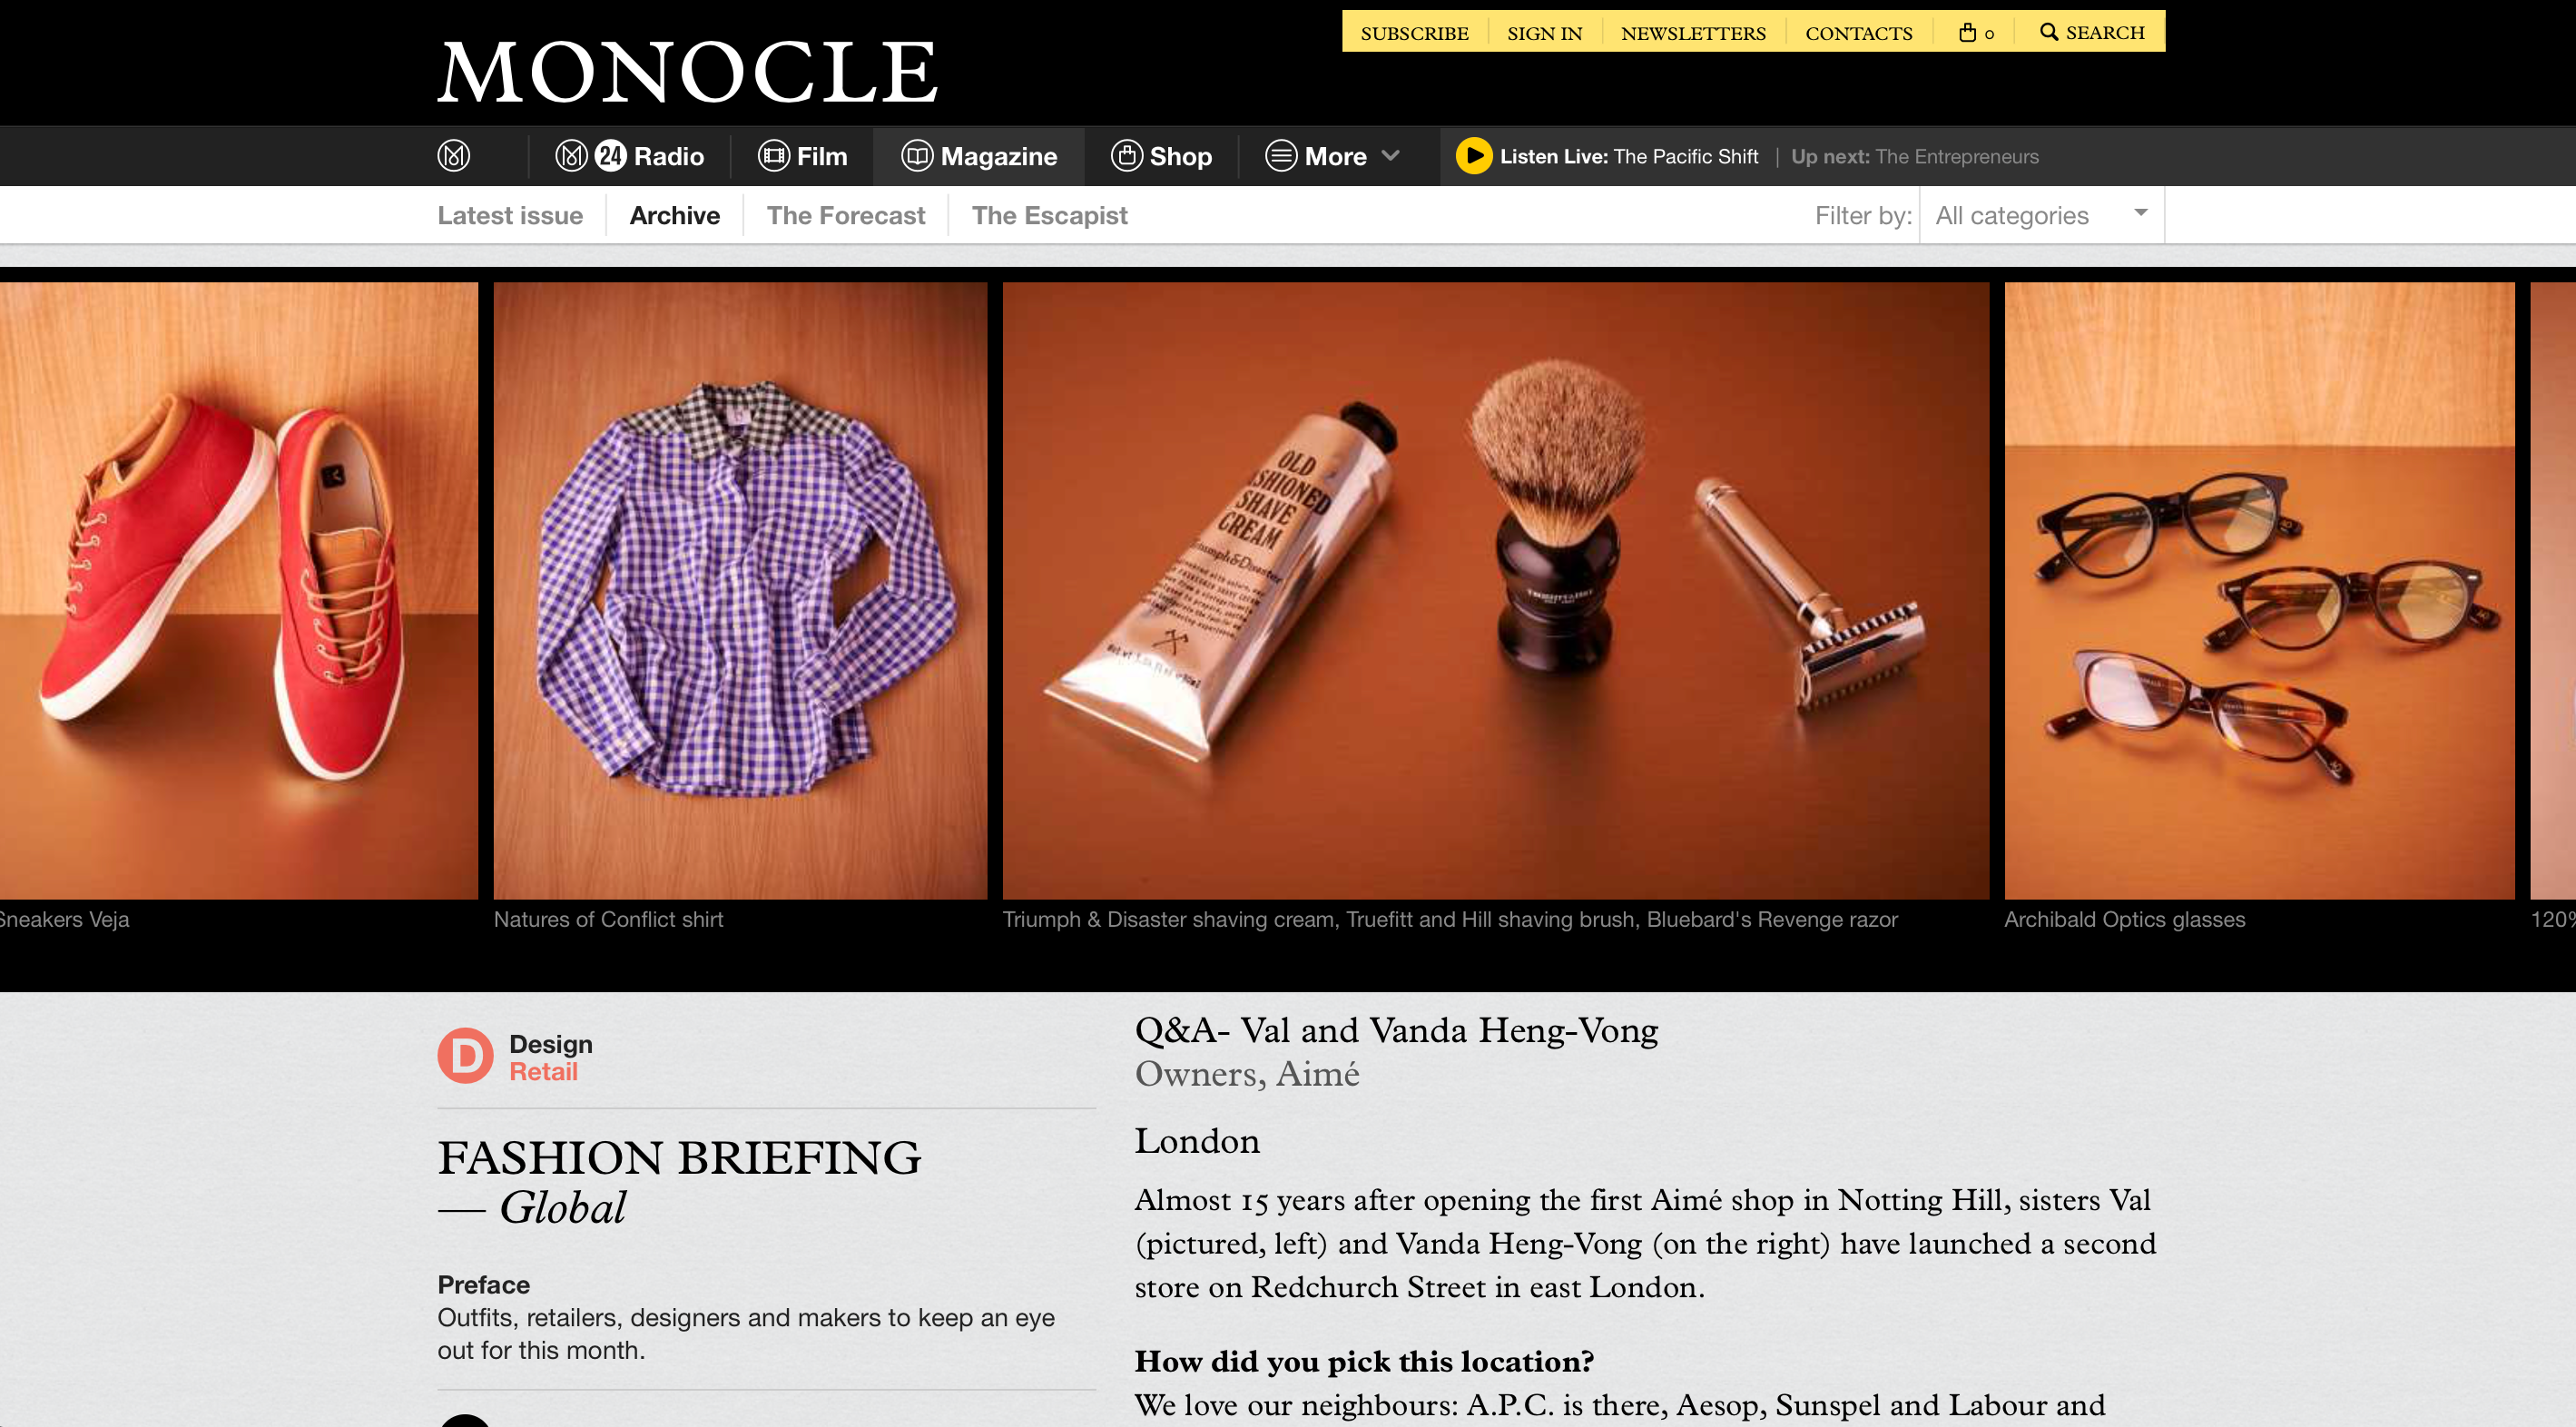 Monocle - Global Fashion Briefing featuring Triumph & Disaster